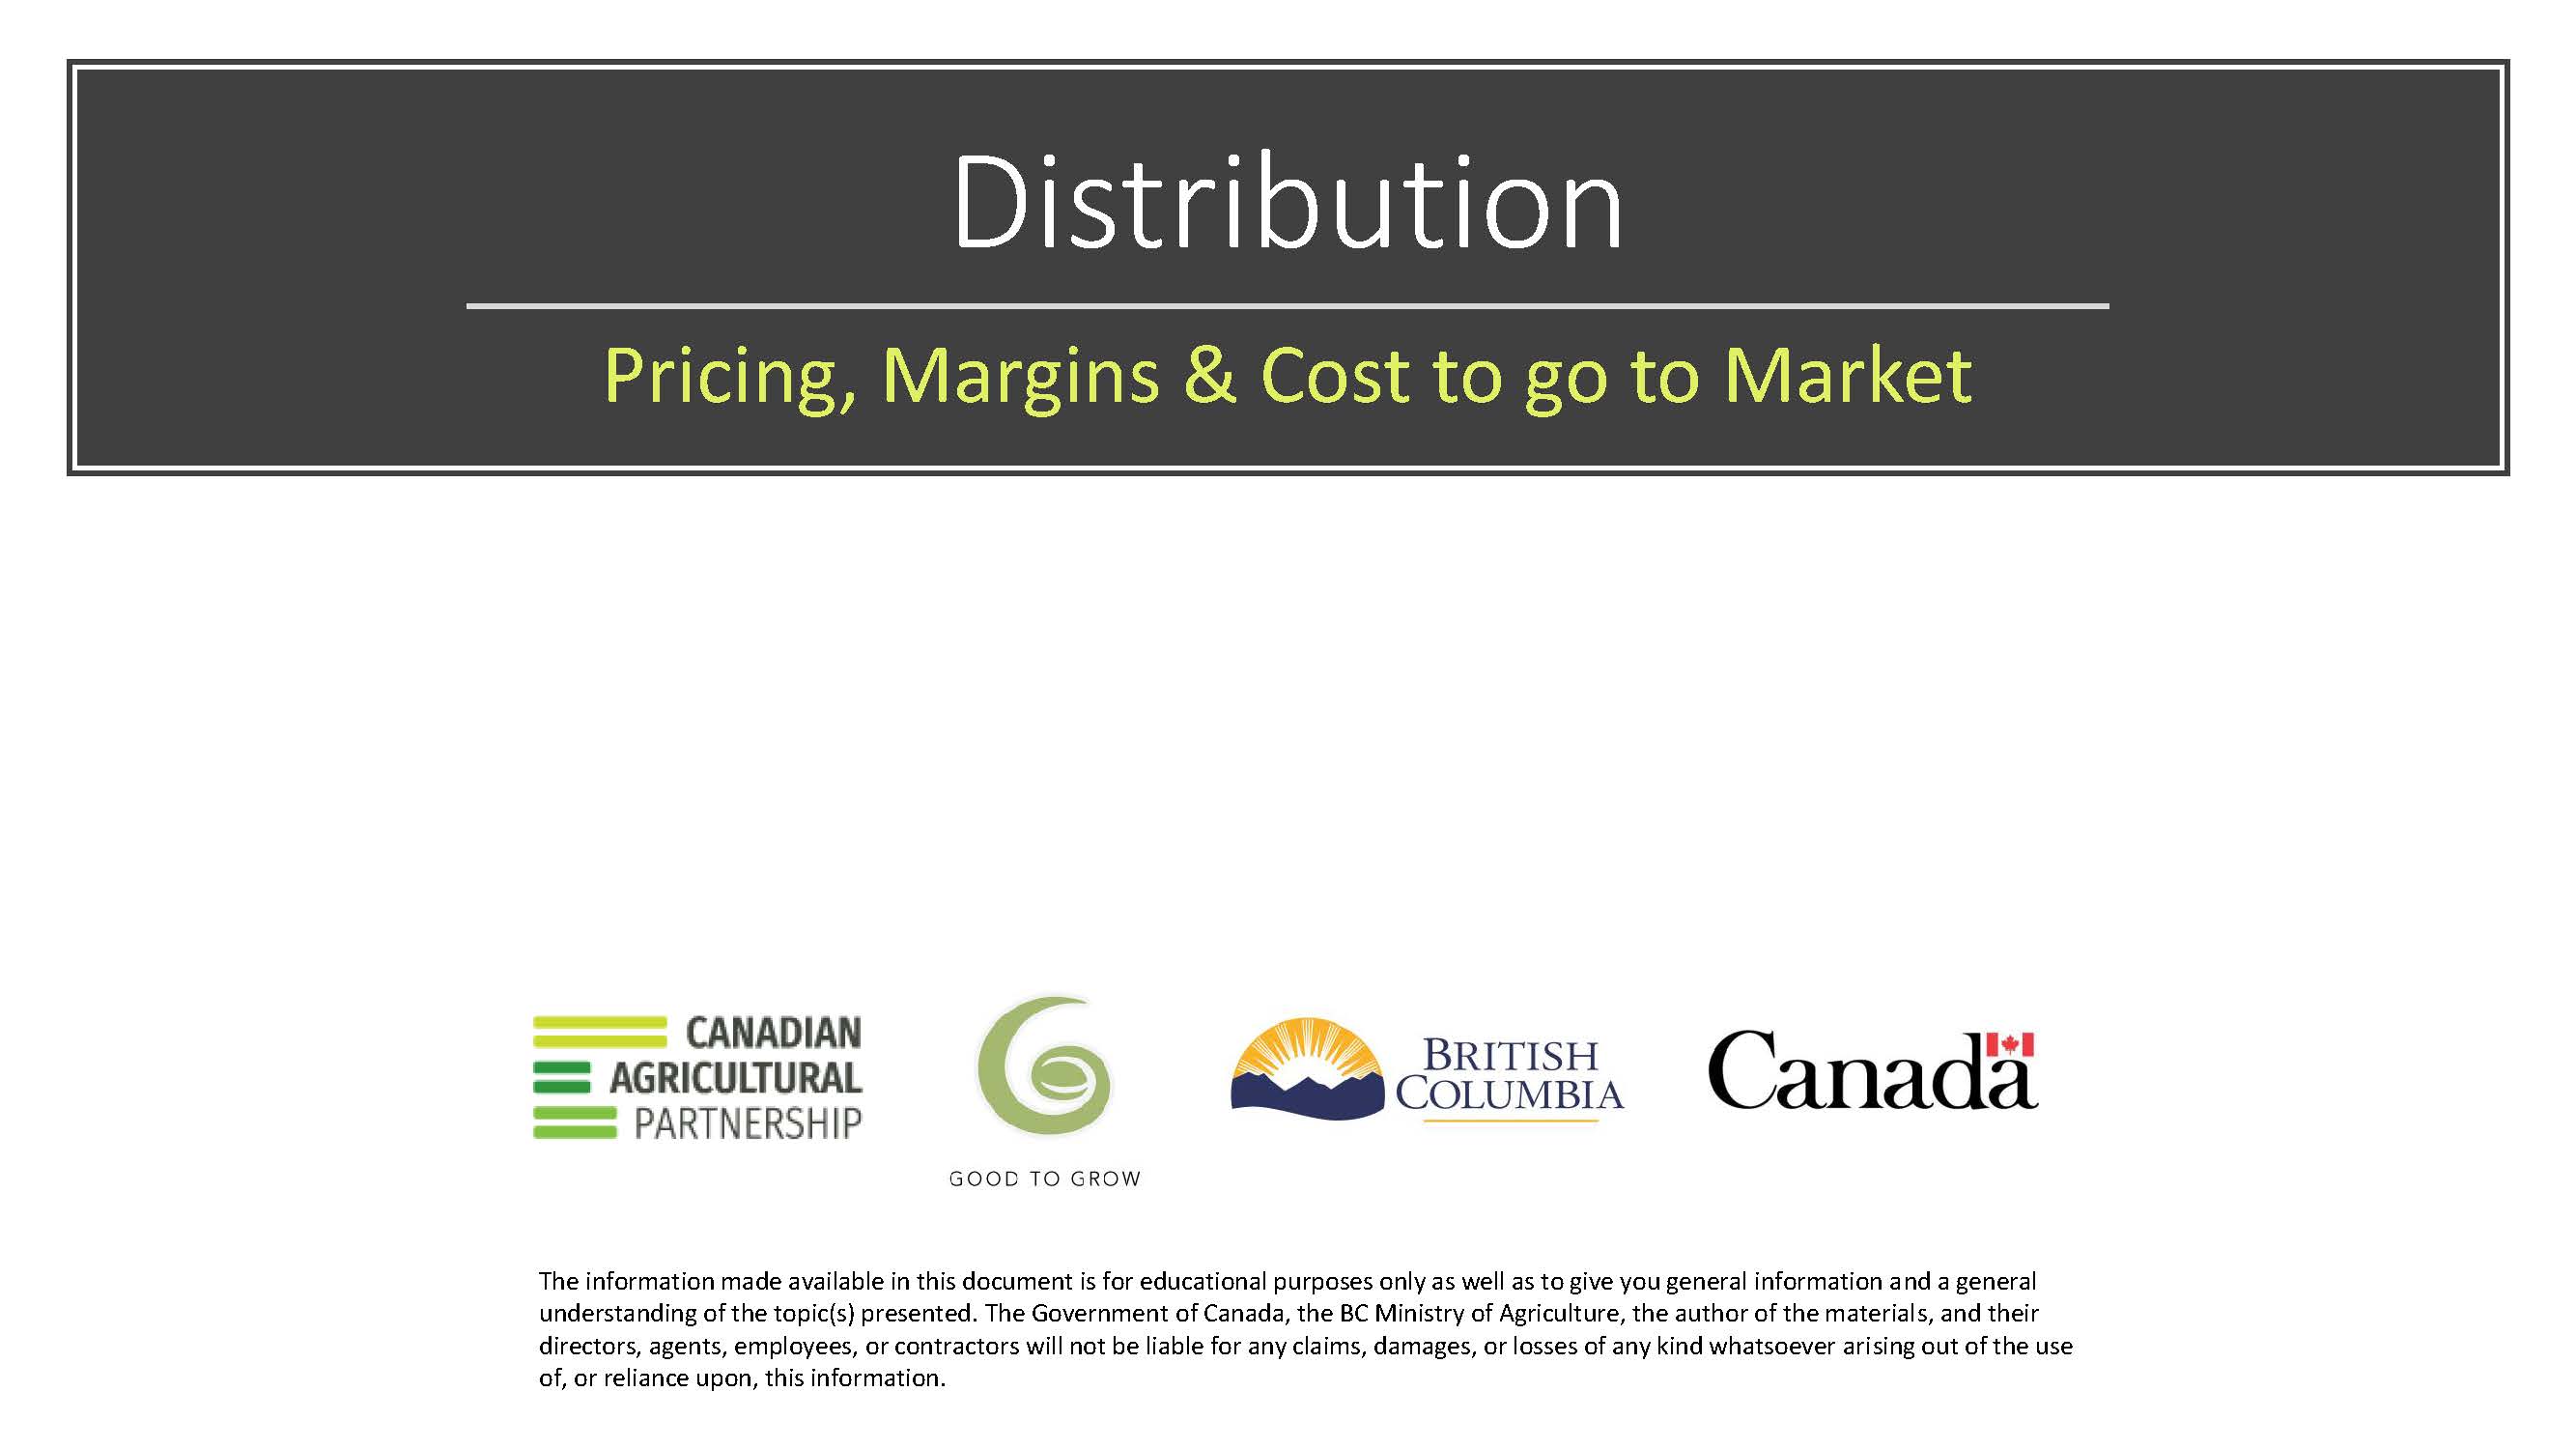 Distribution and Pricing